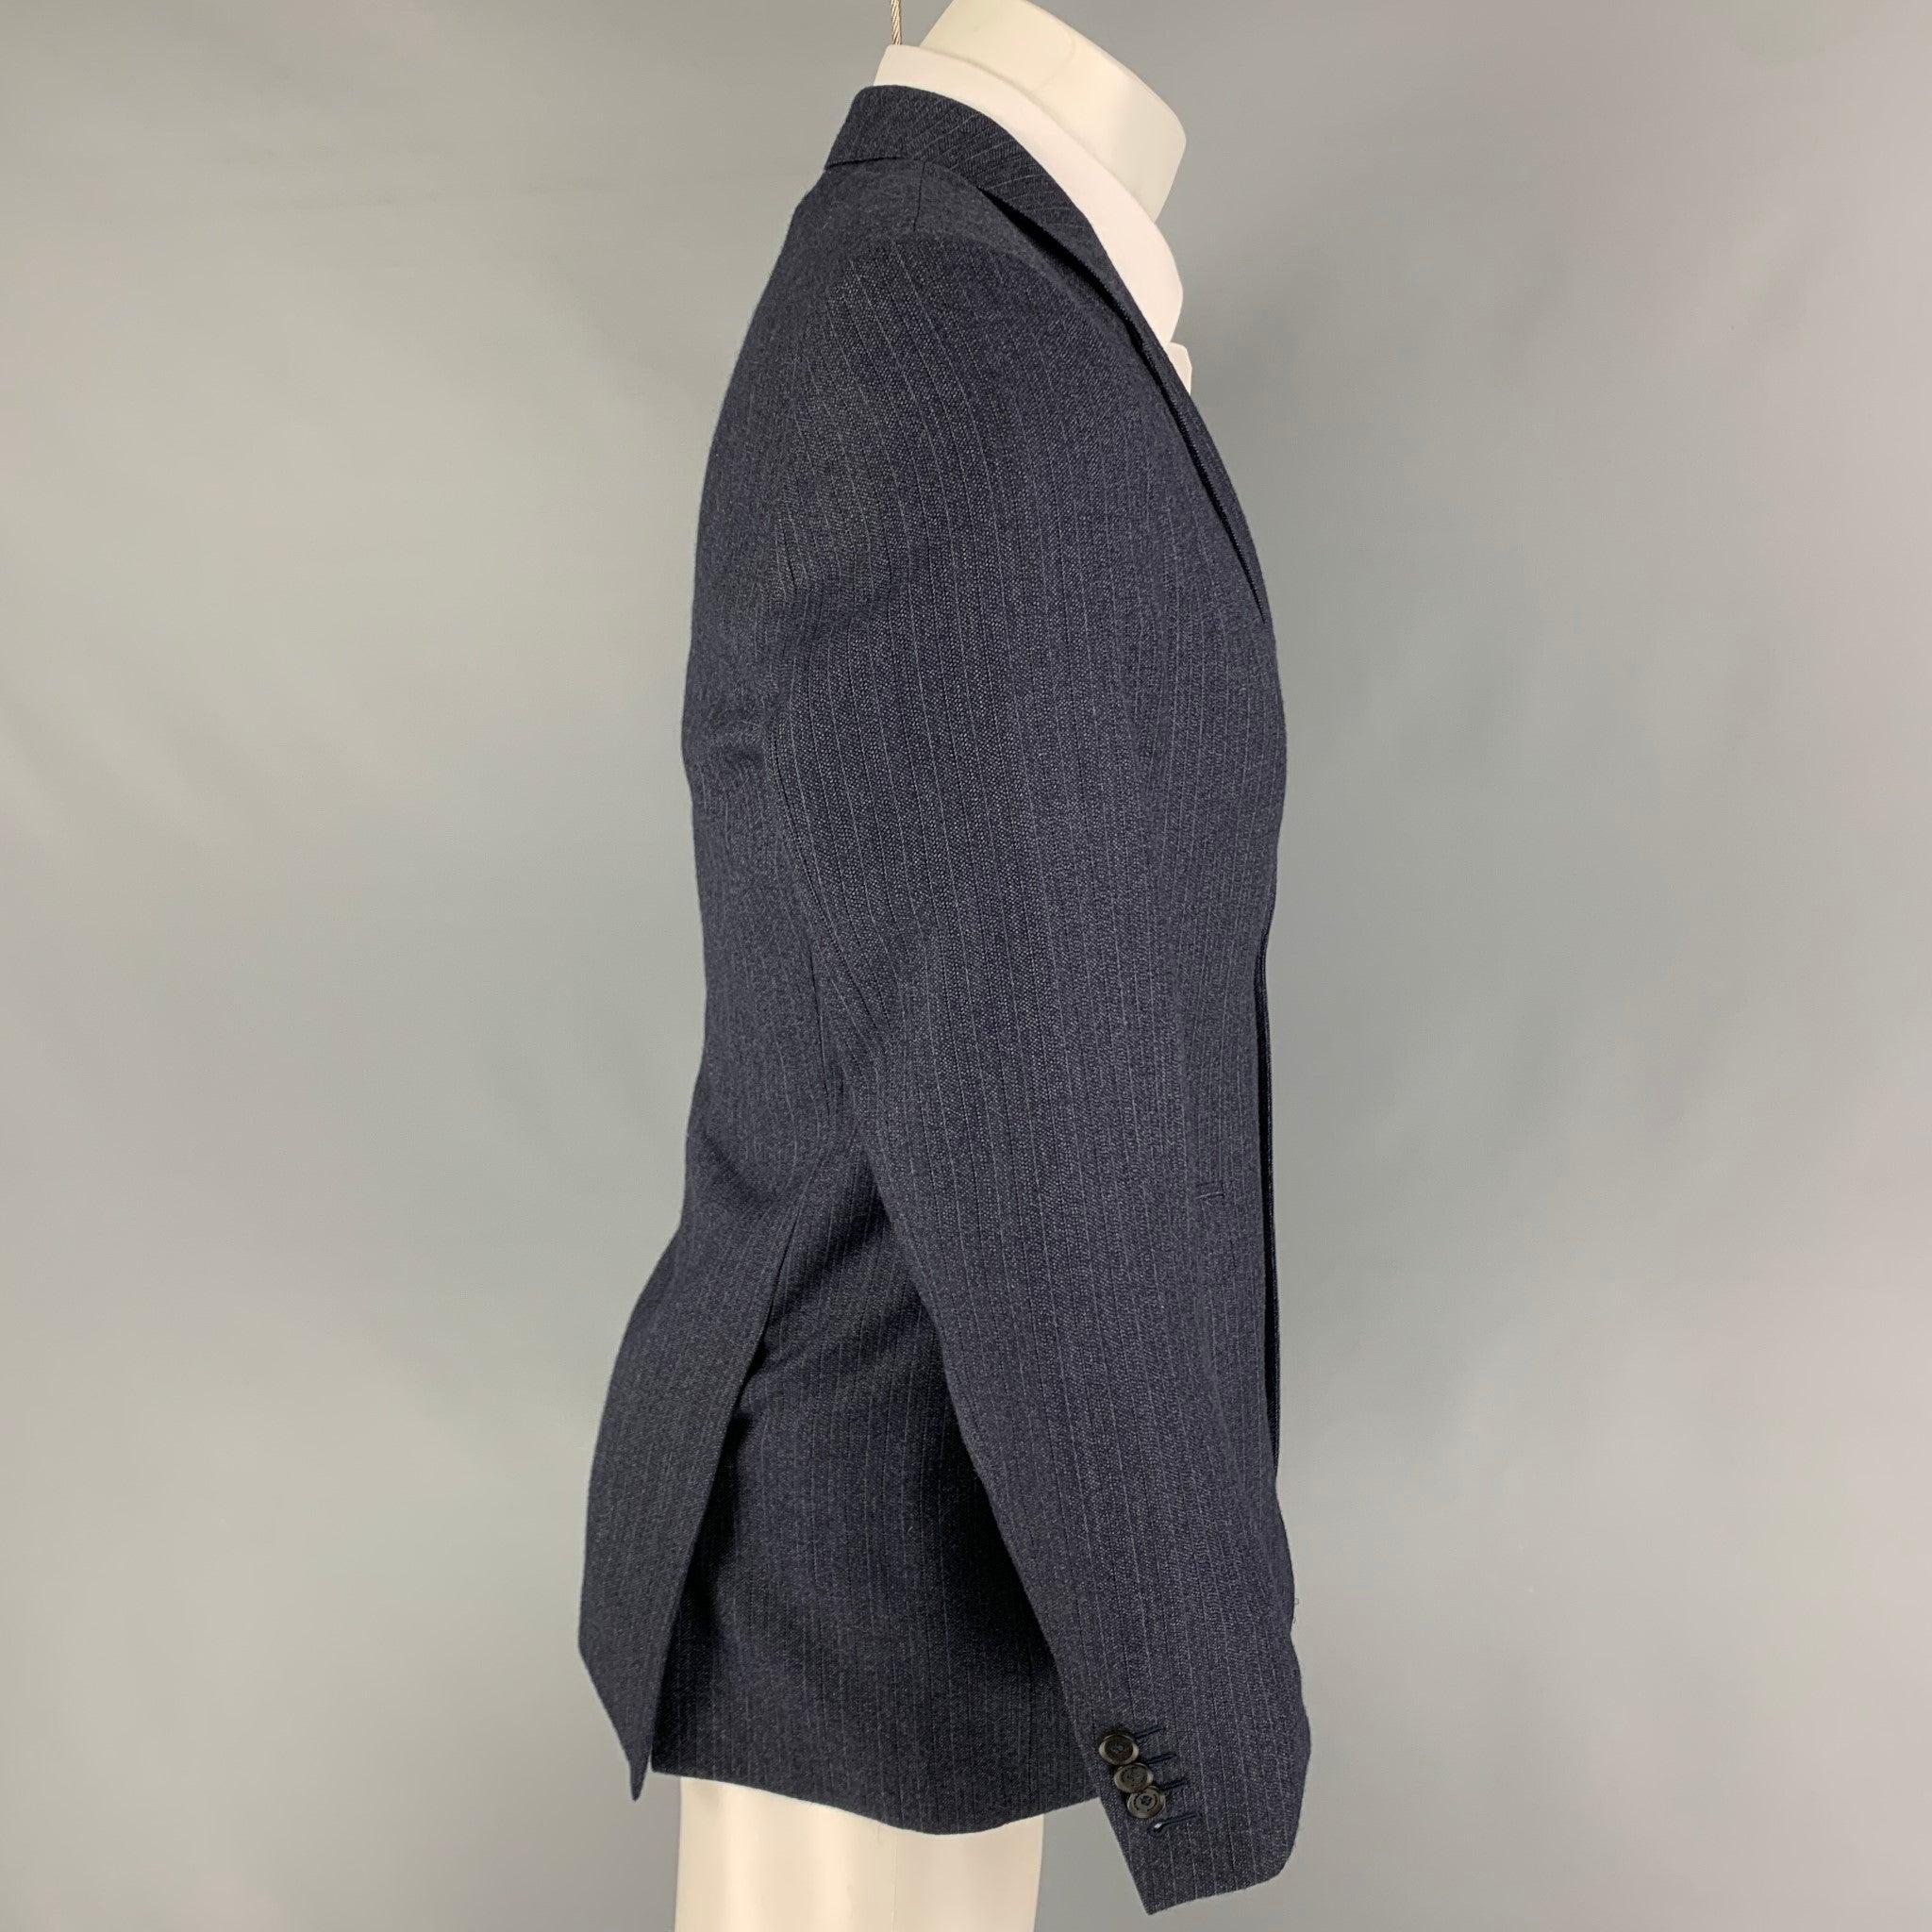 BURBERRY PRORSUM sport coat comes in a navy stripe wool with a full liner featuring a notch lapel, flap pockets, double back vent, and a double button closure.
Very Good
Pre-Owned Condition. 

Marked:   50 

Measurements: 
 
Shoulder: 17 inches 